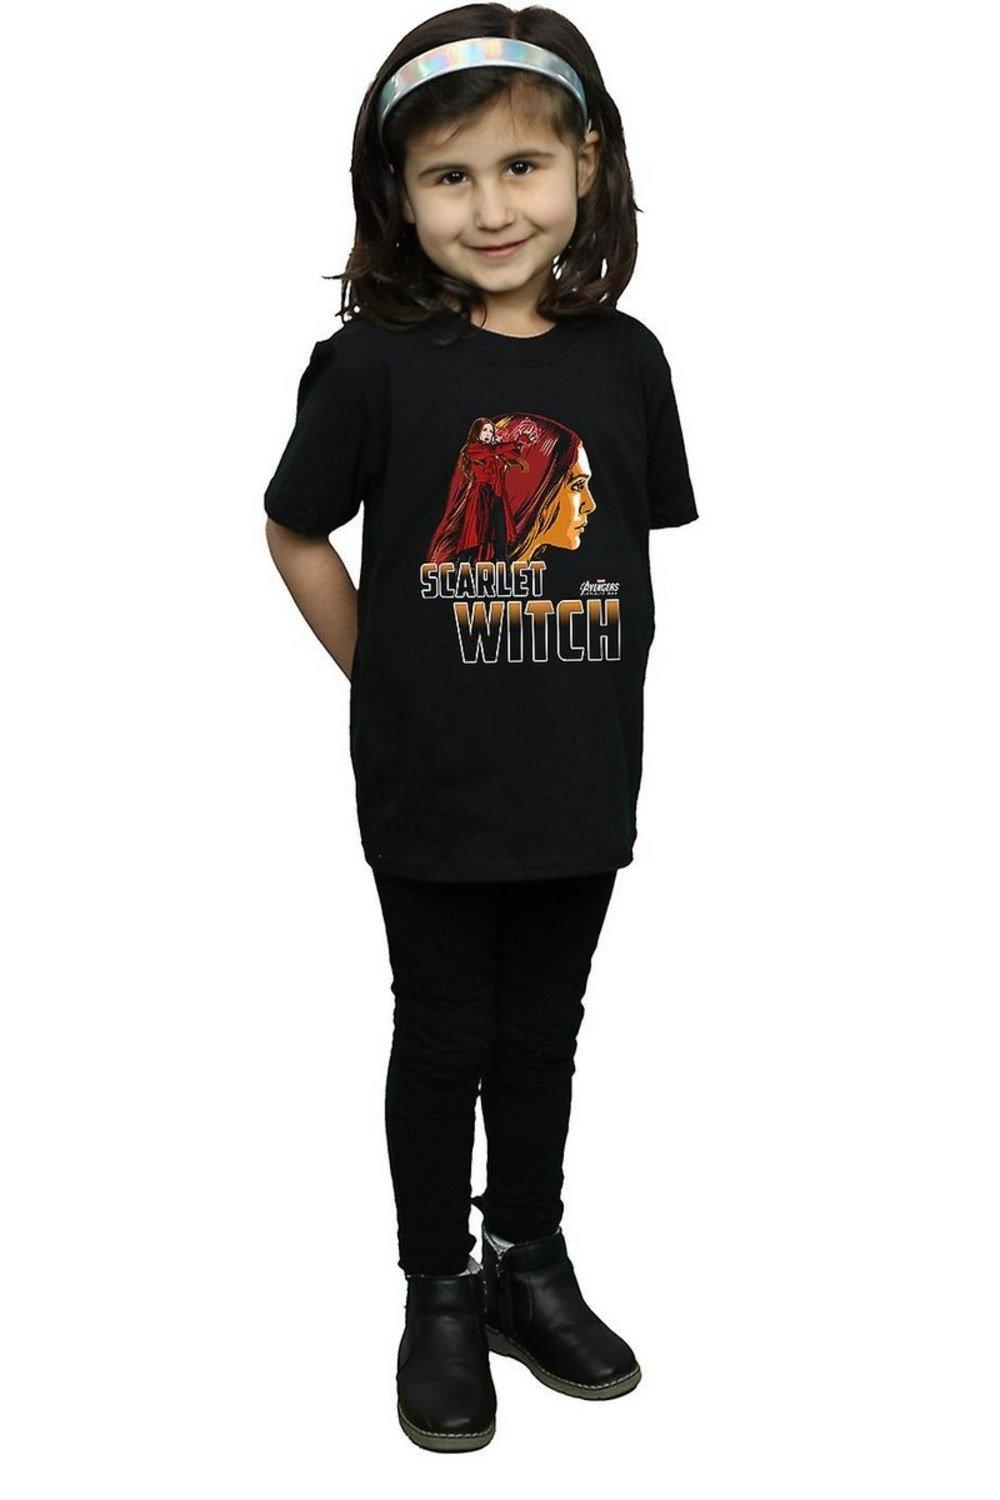 Scarlet Witch Cotton T-Shirt